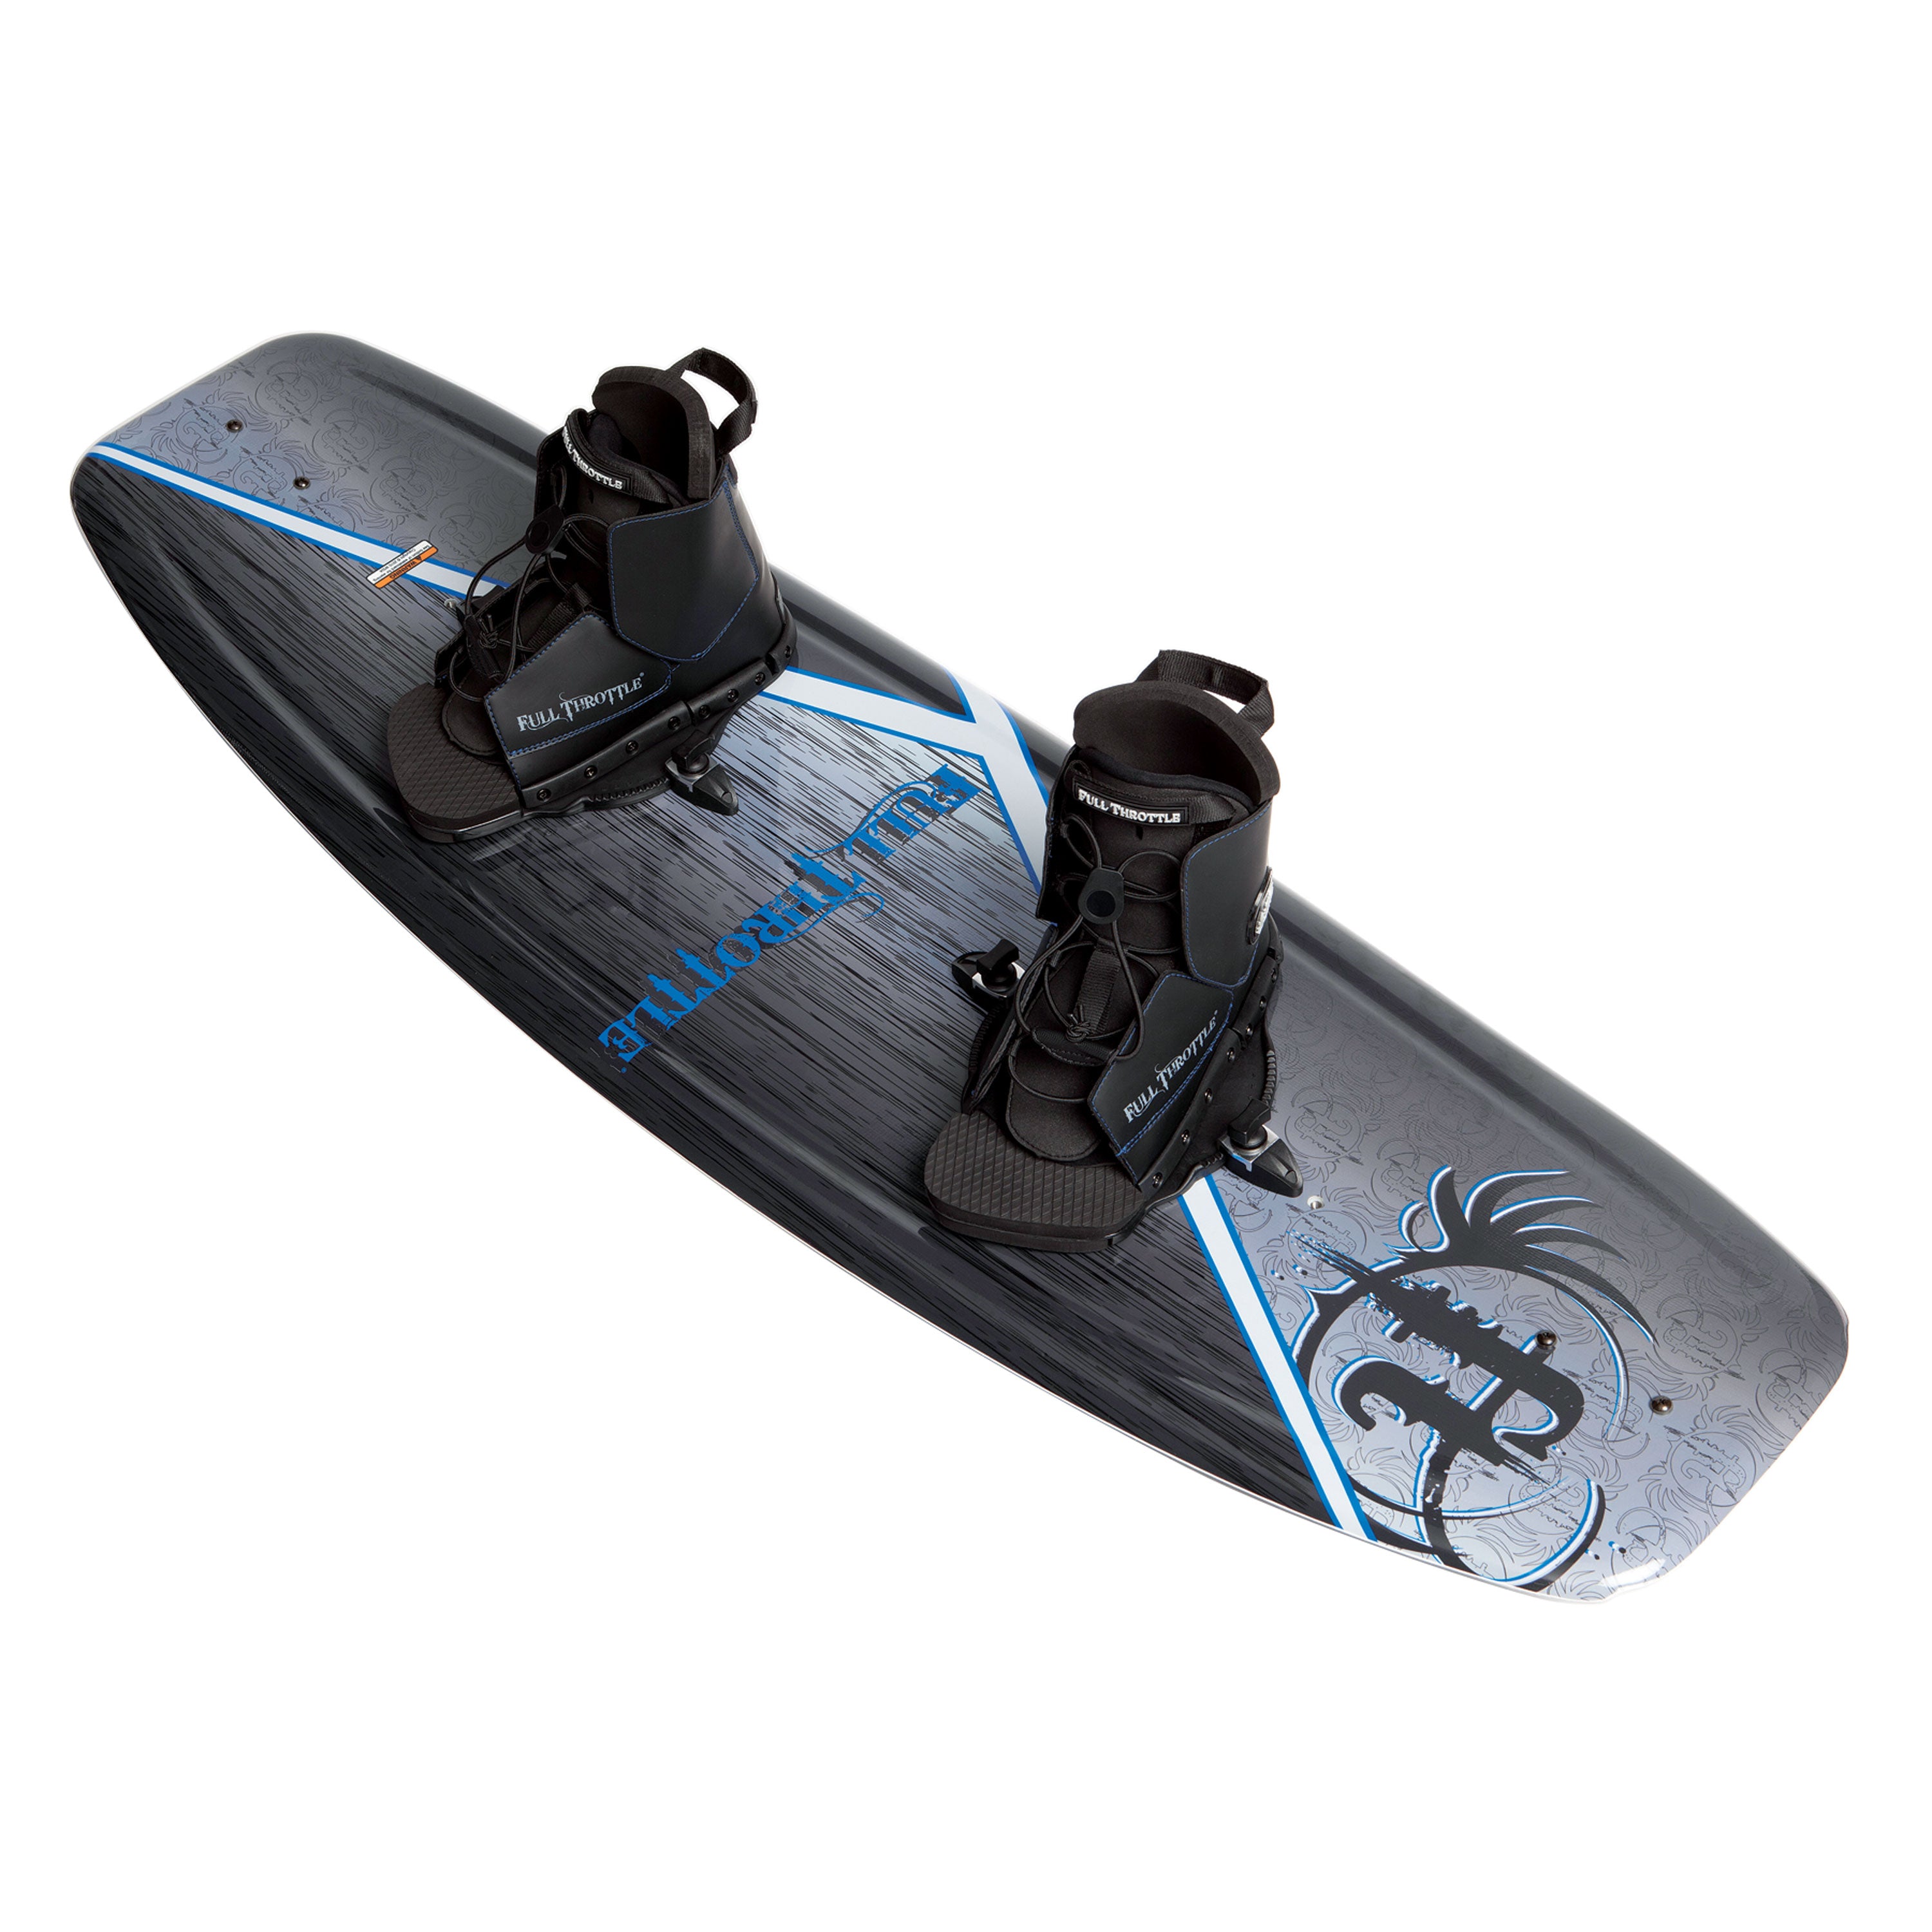 Full Throttle 312000-700-999-12 Aqua Extreme Wakeboard with Lace-Up Boots